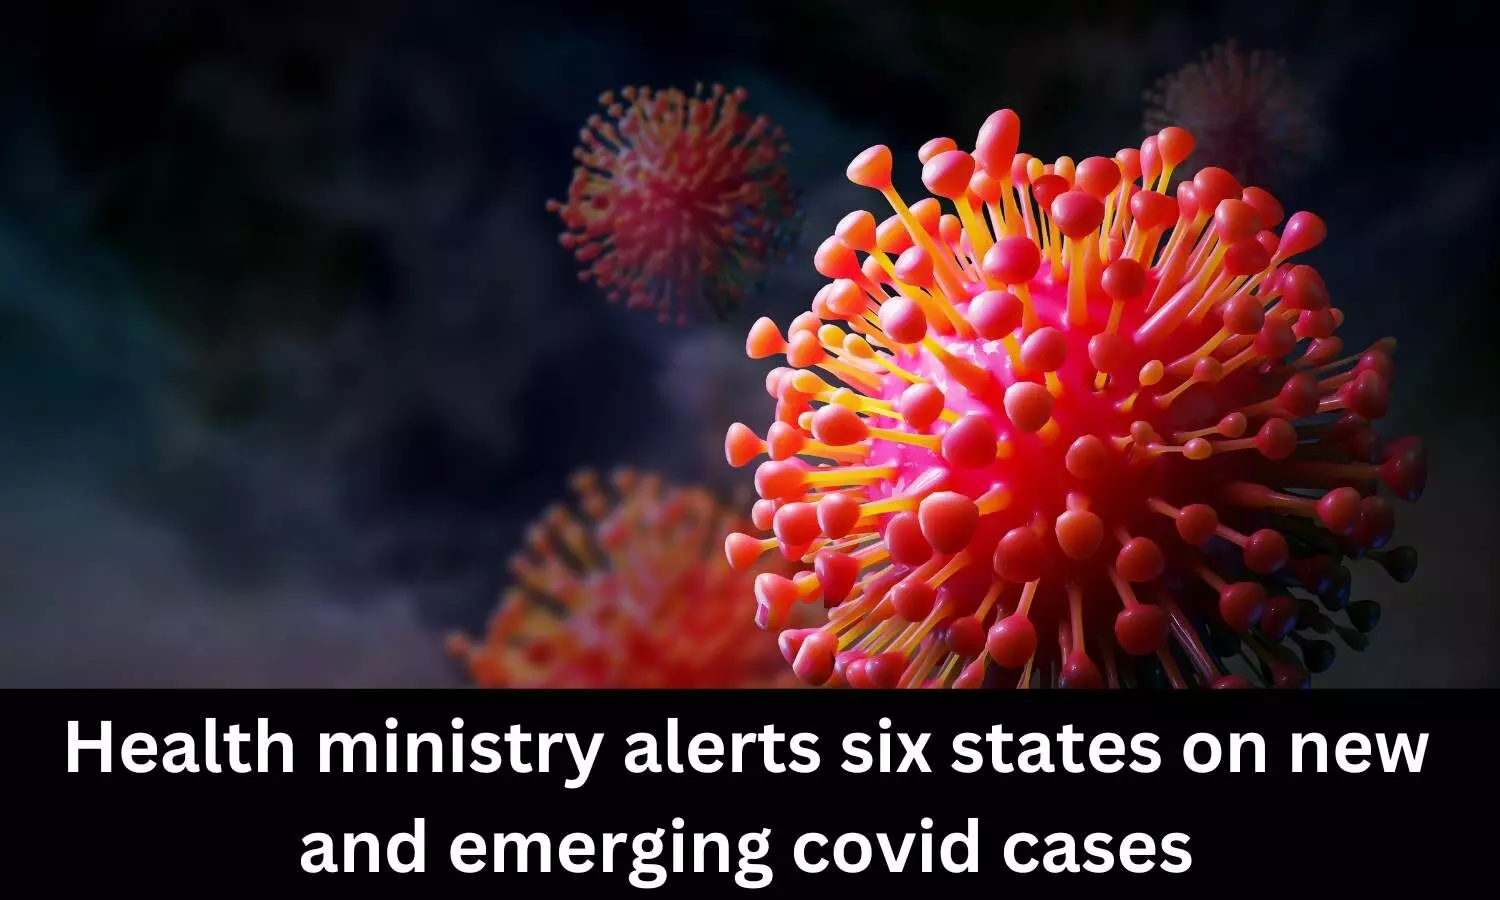 Health ministry alerts 6 states on new, emerging COVID cases